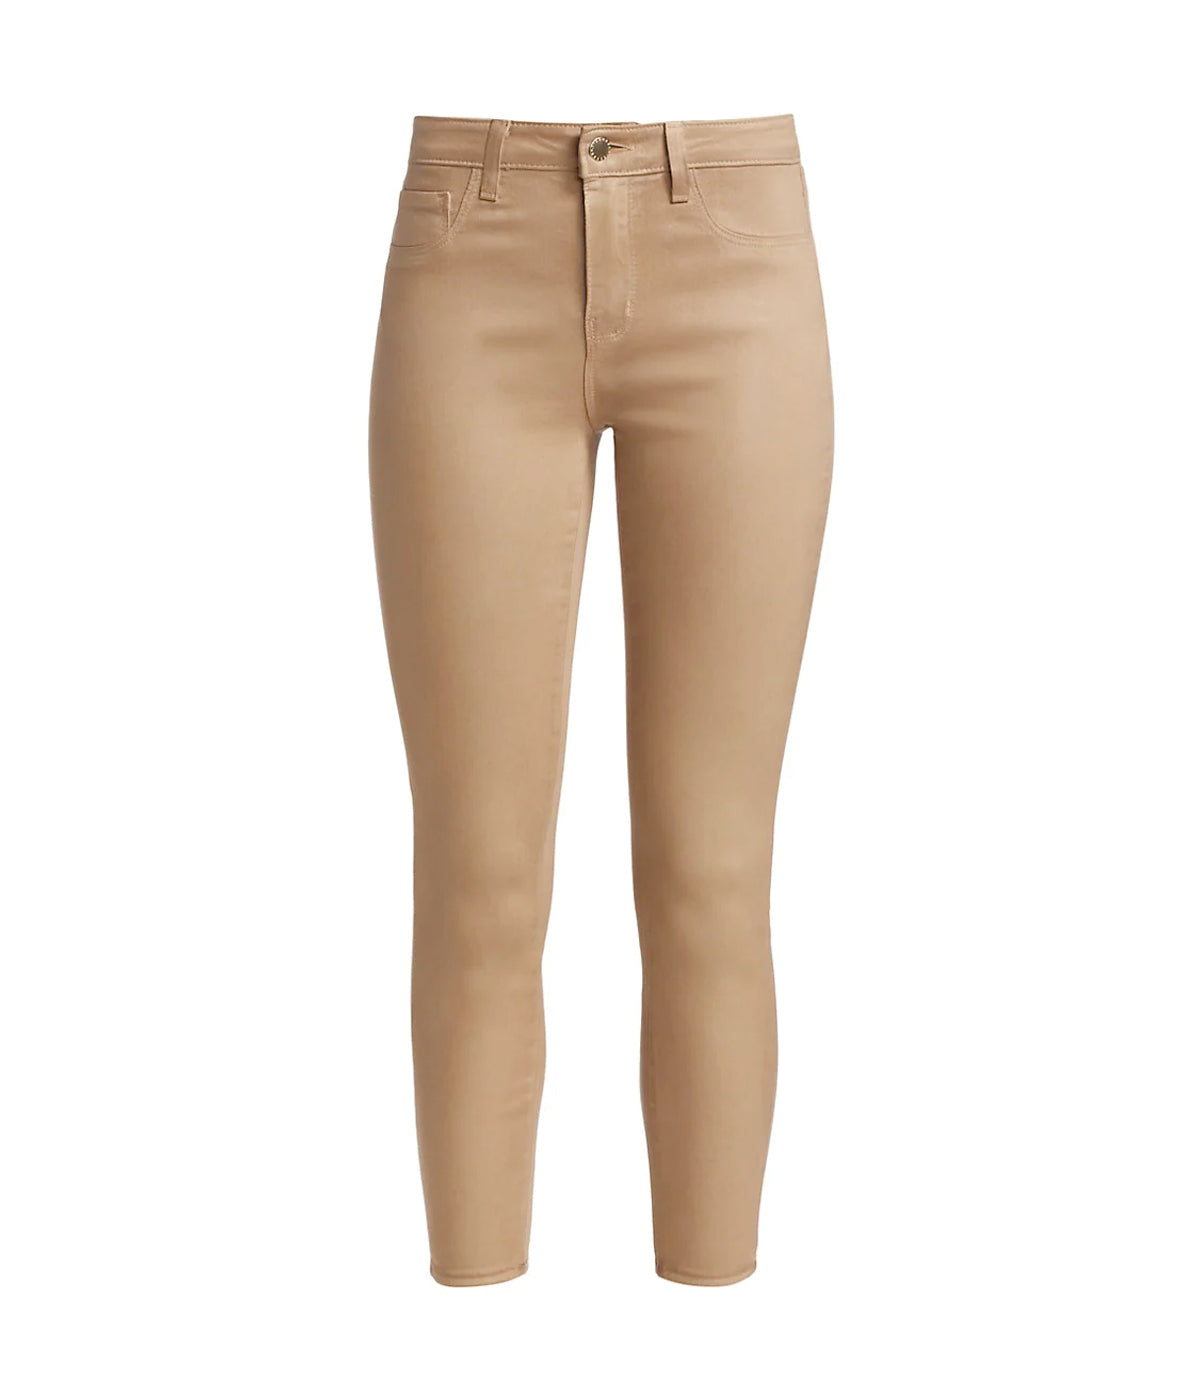 Margot High Rise Skinny Jean in Cappuccino Coated